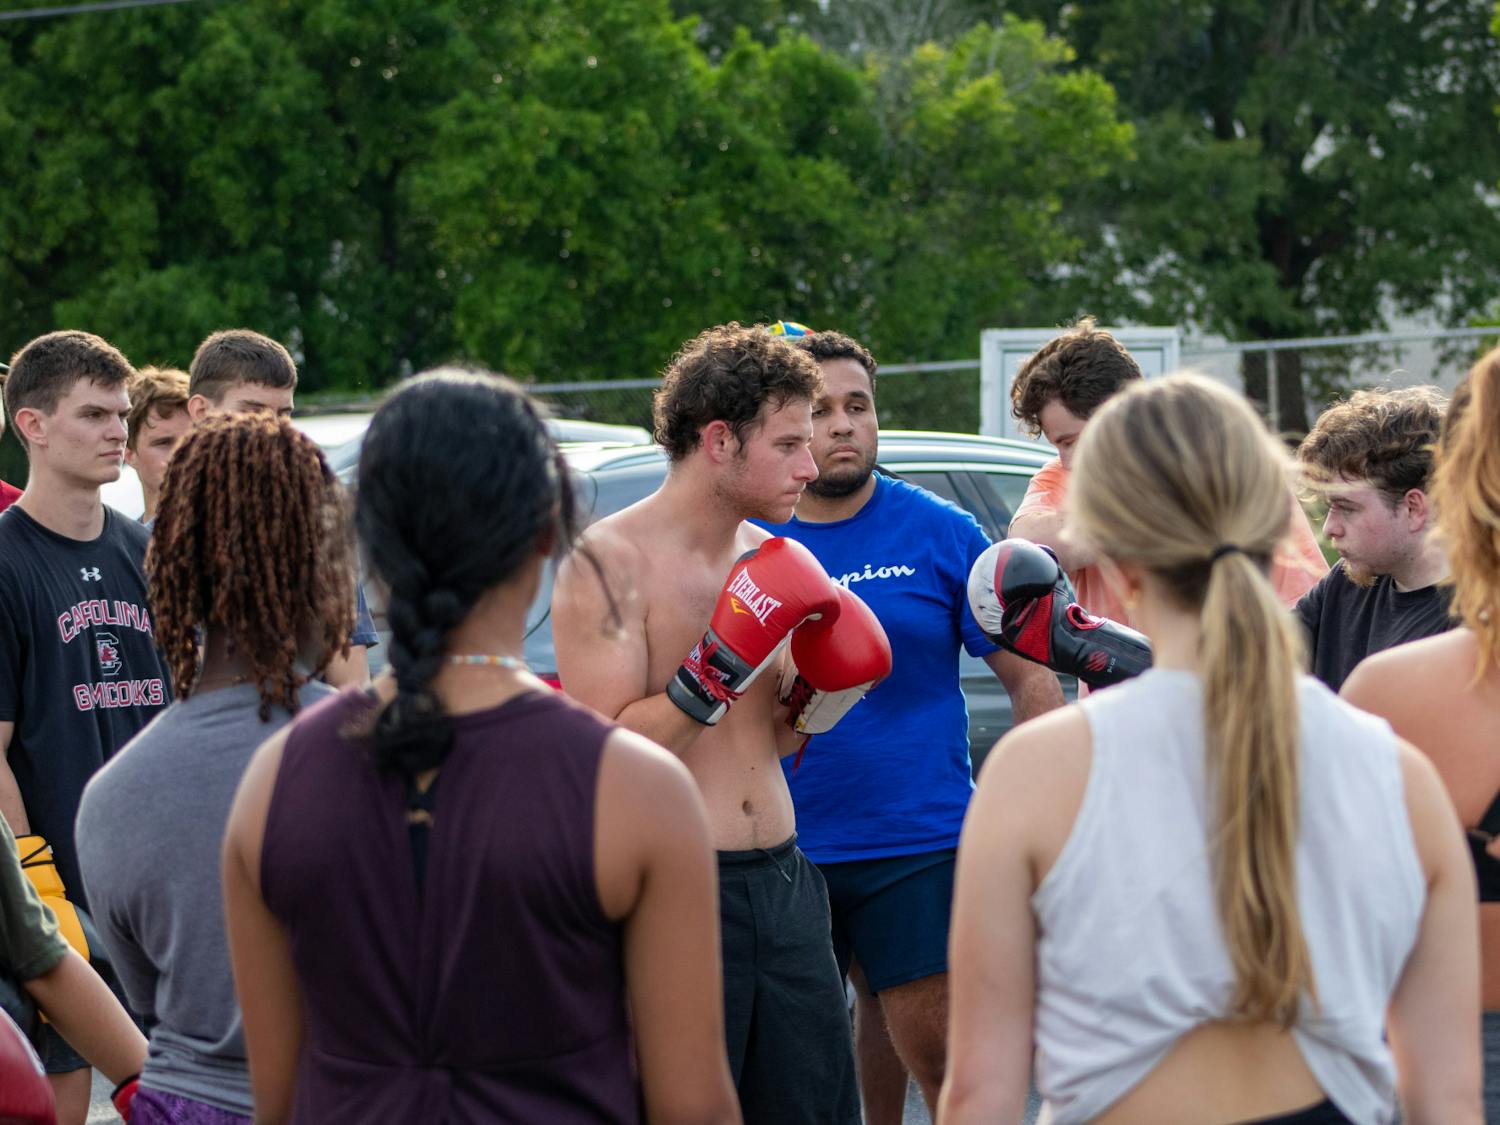 USC's Carolina Boxing Club gathers for an high-paced practice session on Sept. 12, 2022, at Battle Boxing Gym on Bluff Rd. in Columbia, S.C. The Carolina Boxing Club practices Monday, Wednesday and Friday afternoons for a variety of training sessions to prepare members for live-sparring sessions and tournaments taking place later this season.